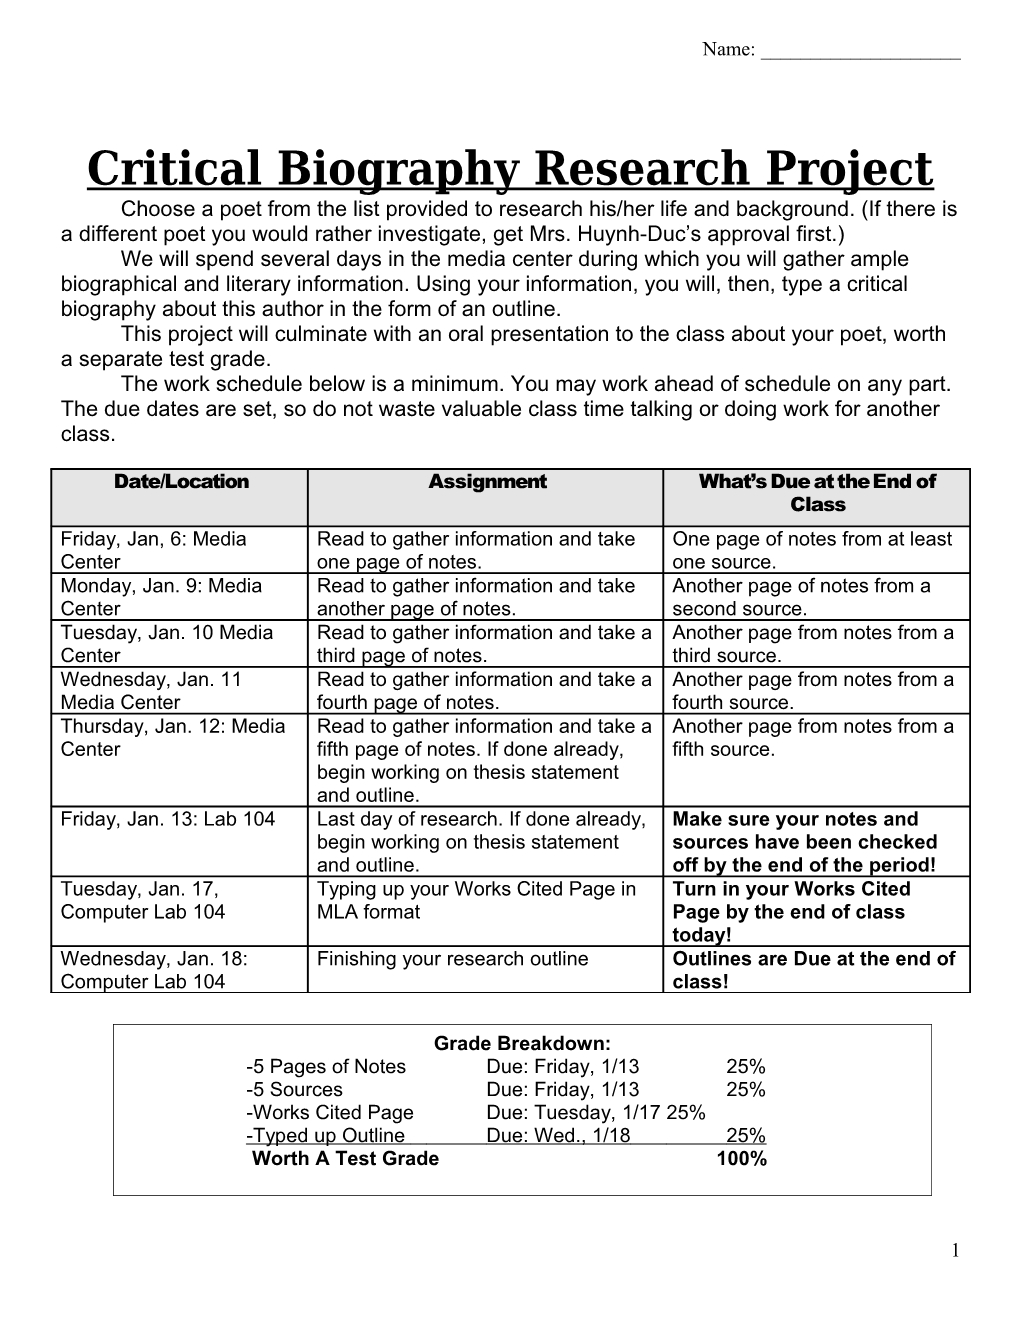 Critical Biography Research Project